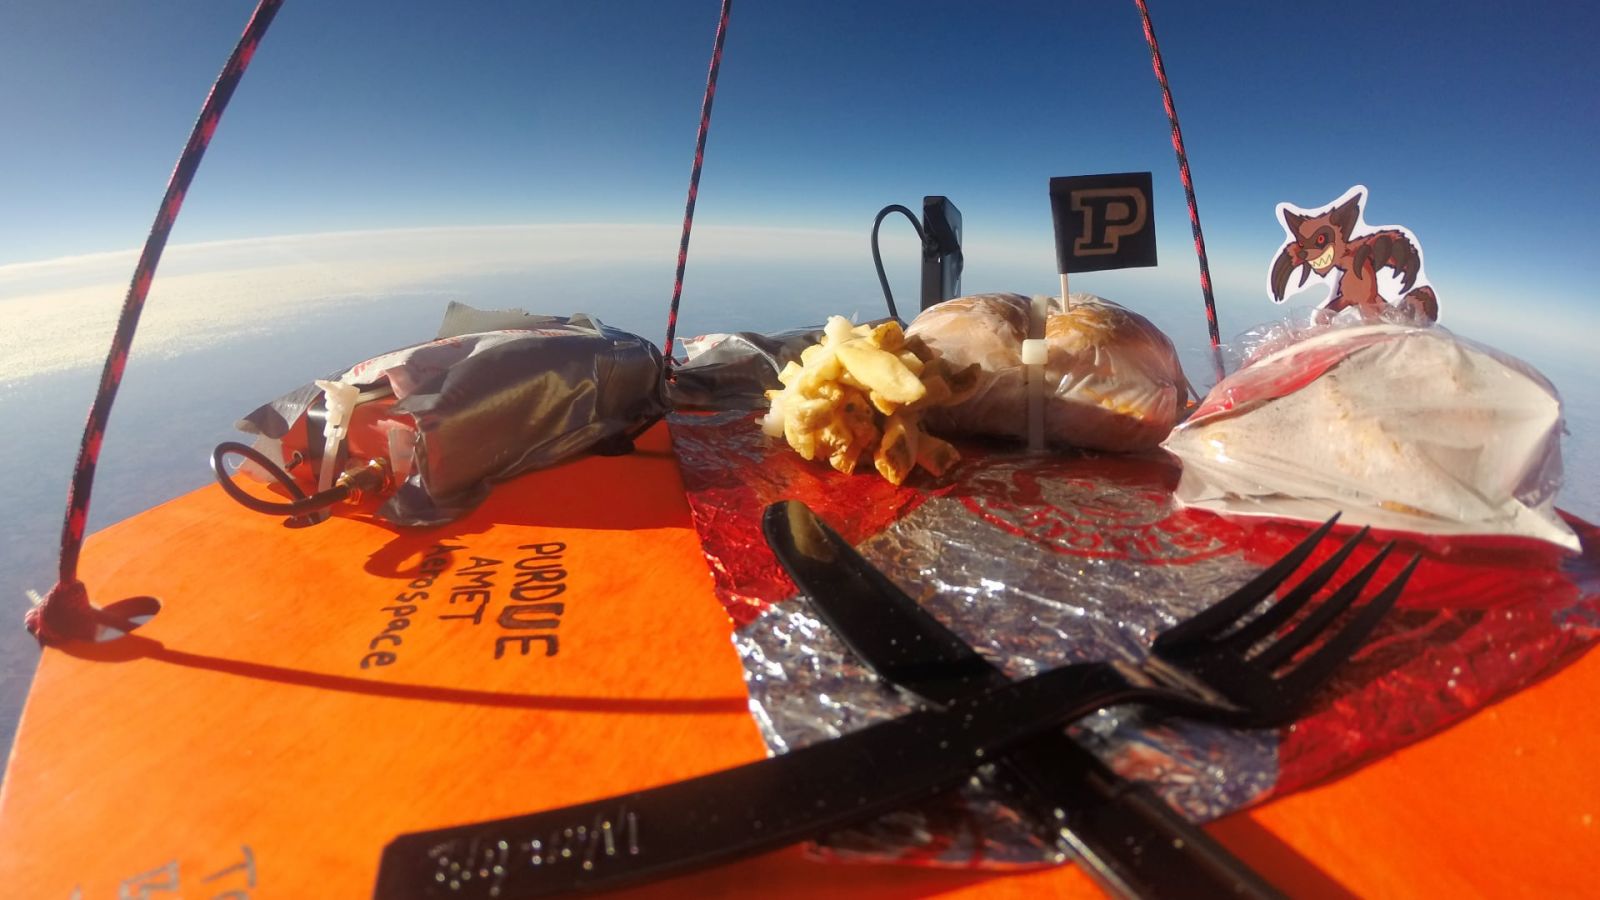 Students in Purdue AMET (Association for Mechanical and Electrical Technologists) lofted a high-altitude weather balloon with a Wendy's Baconator and French fries to 95,000 feet. This photo is from 60,000 feet.